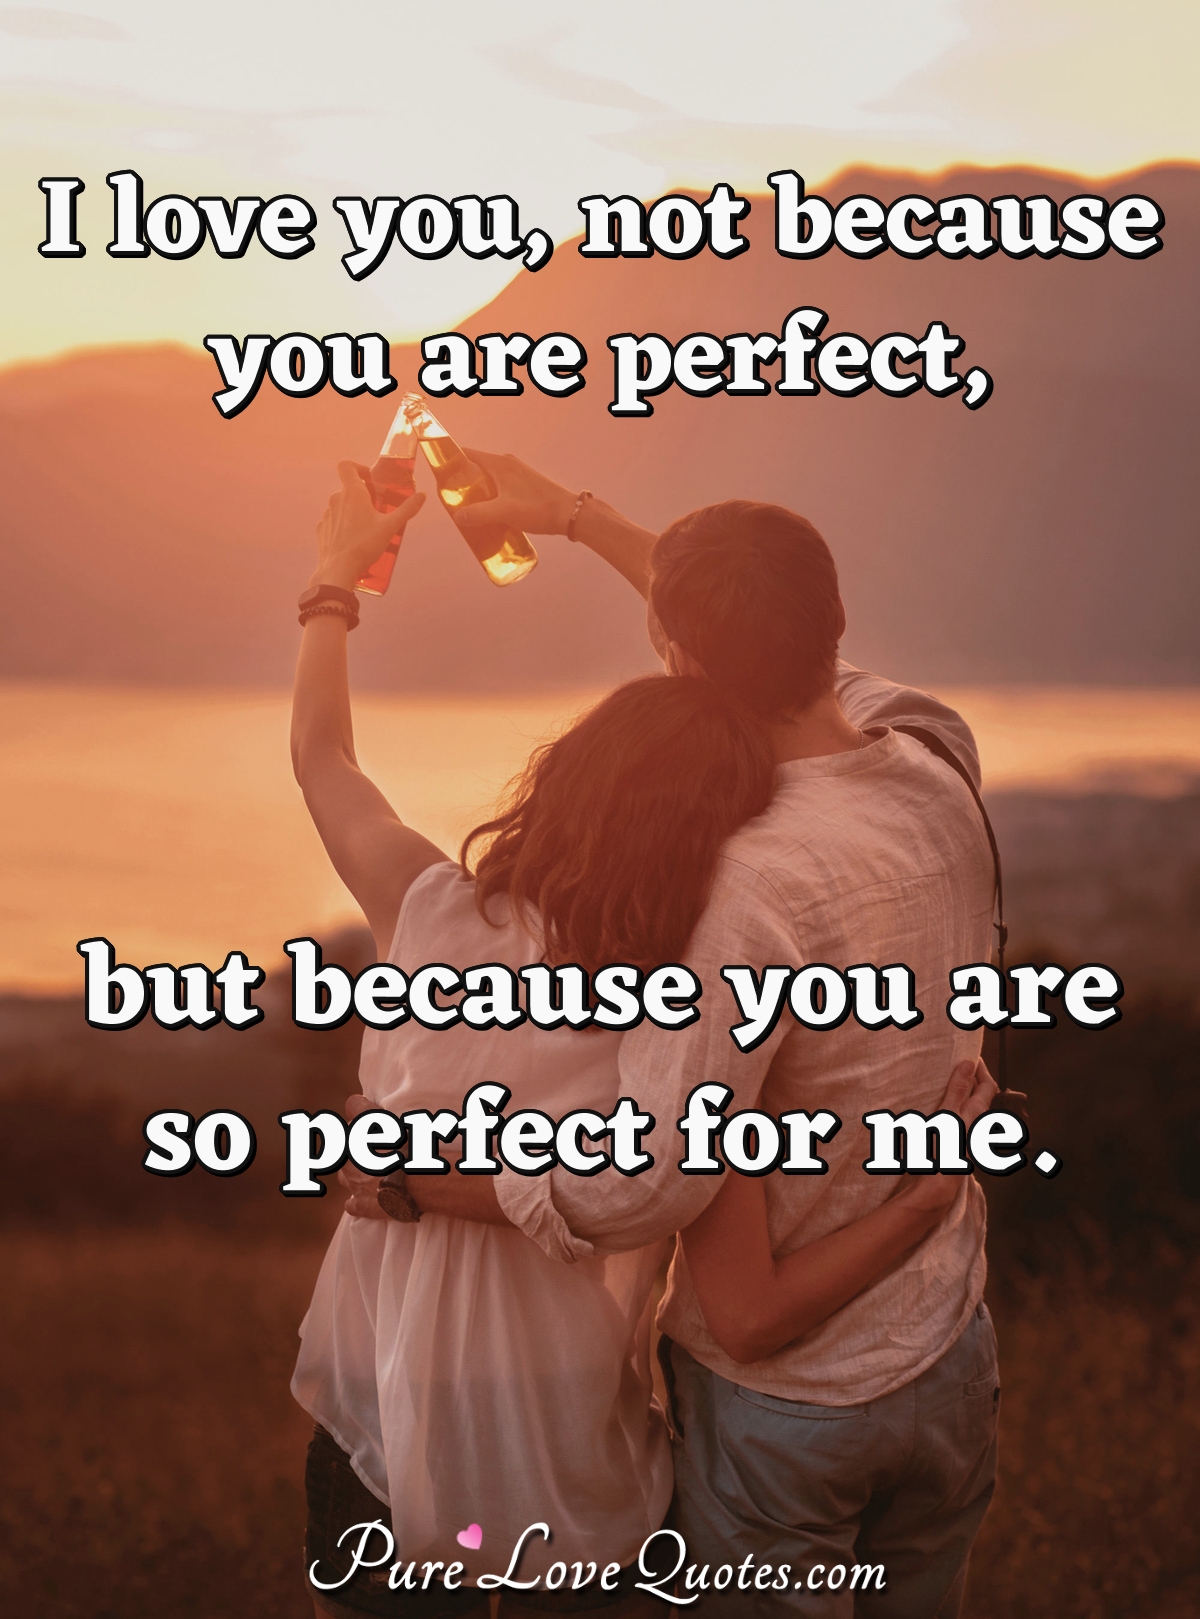 I love you, not because you are perfect, but because you are so perfect for me. - Anonymous